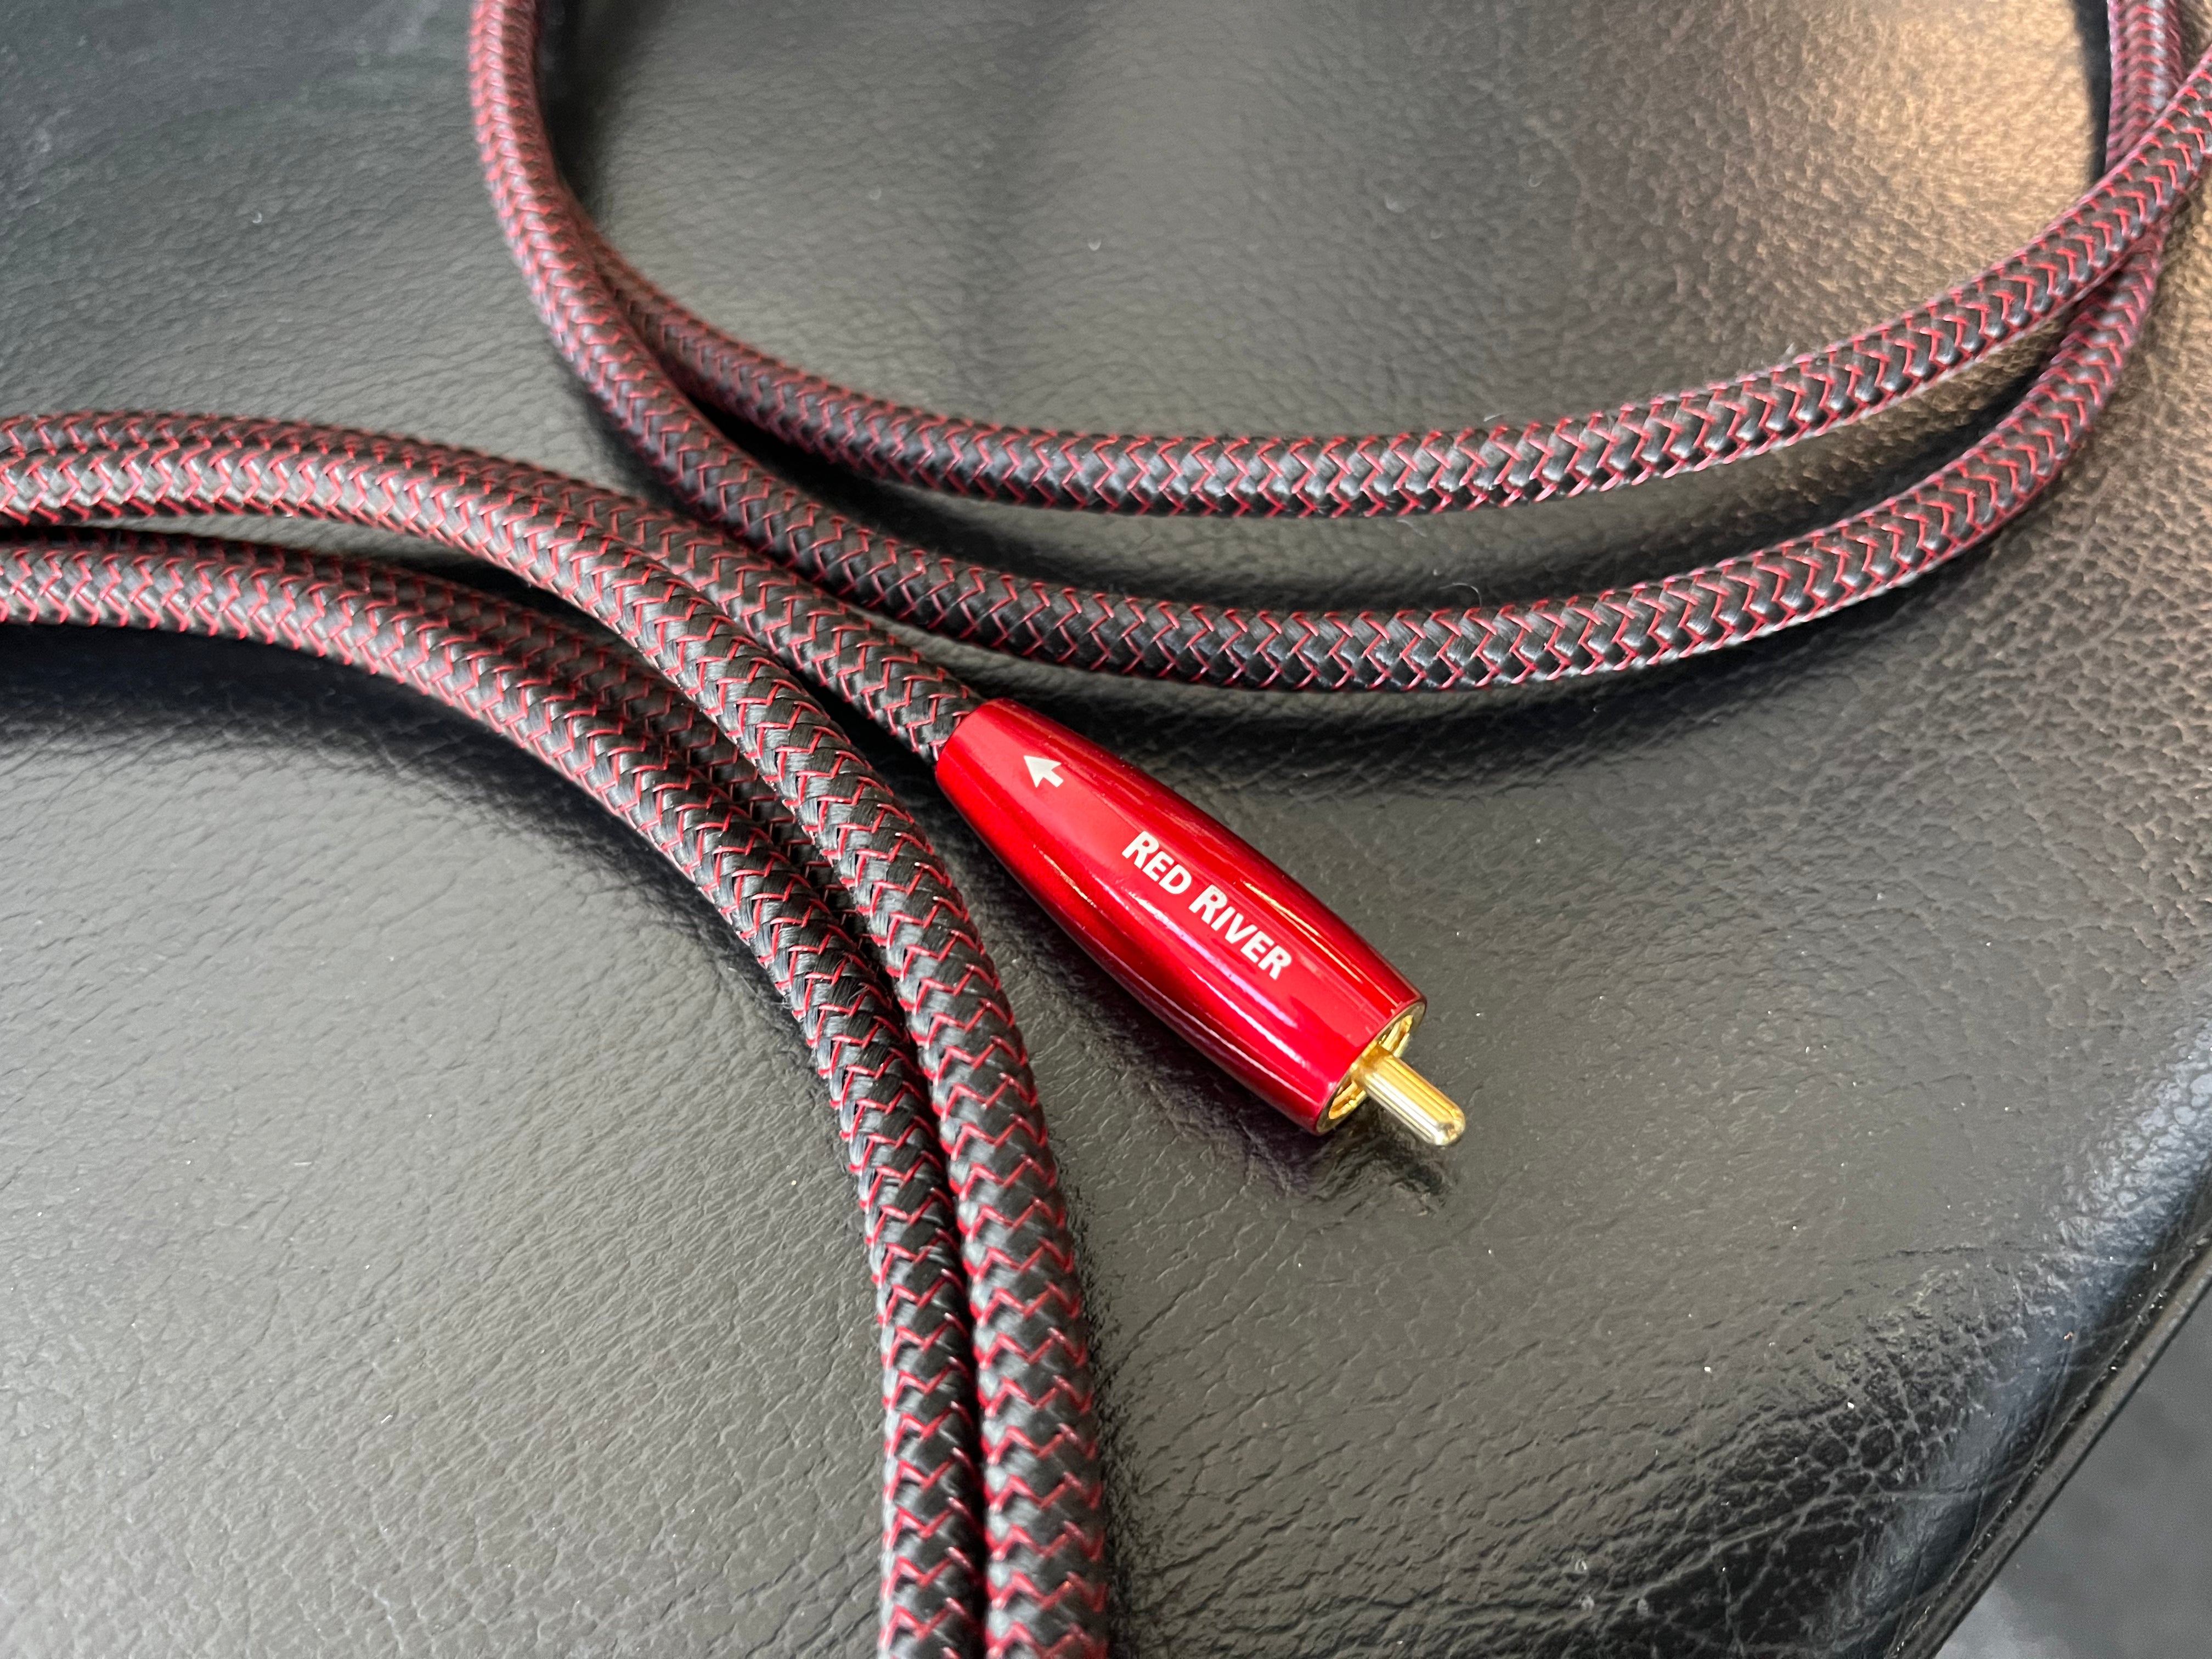 Audioquest Red River RCA-XLR cable 2m, demo removal, location Oulu